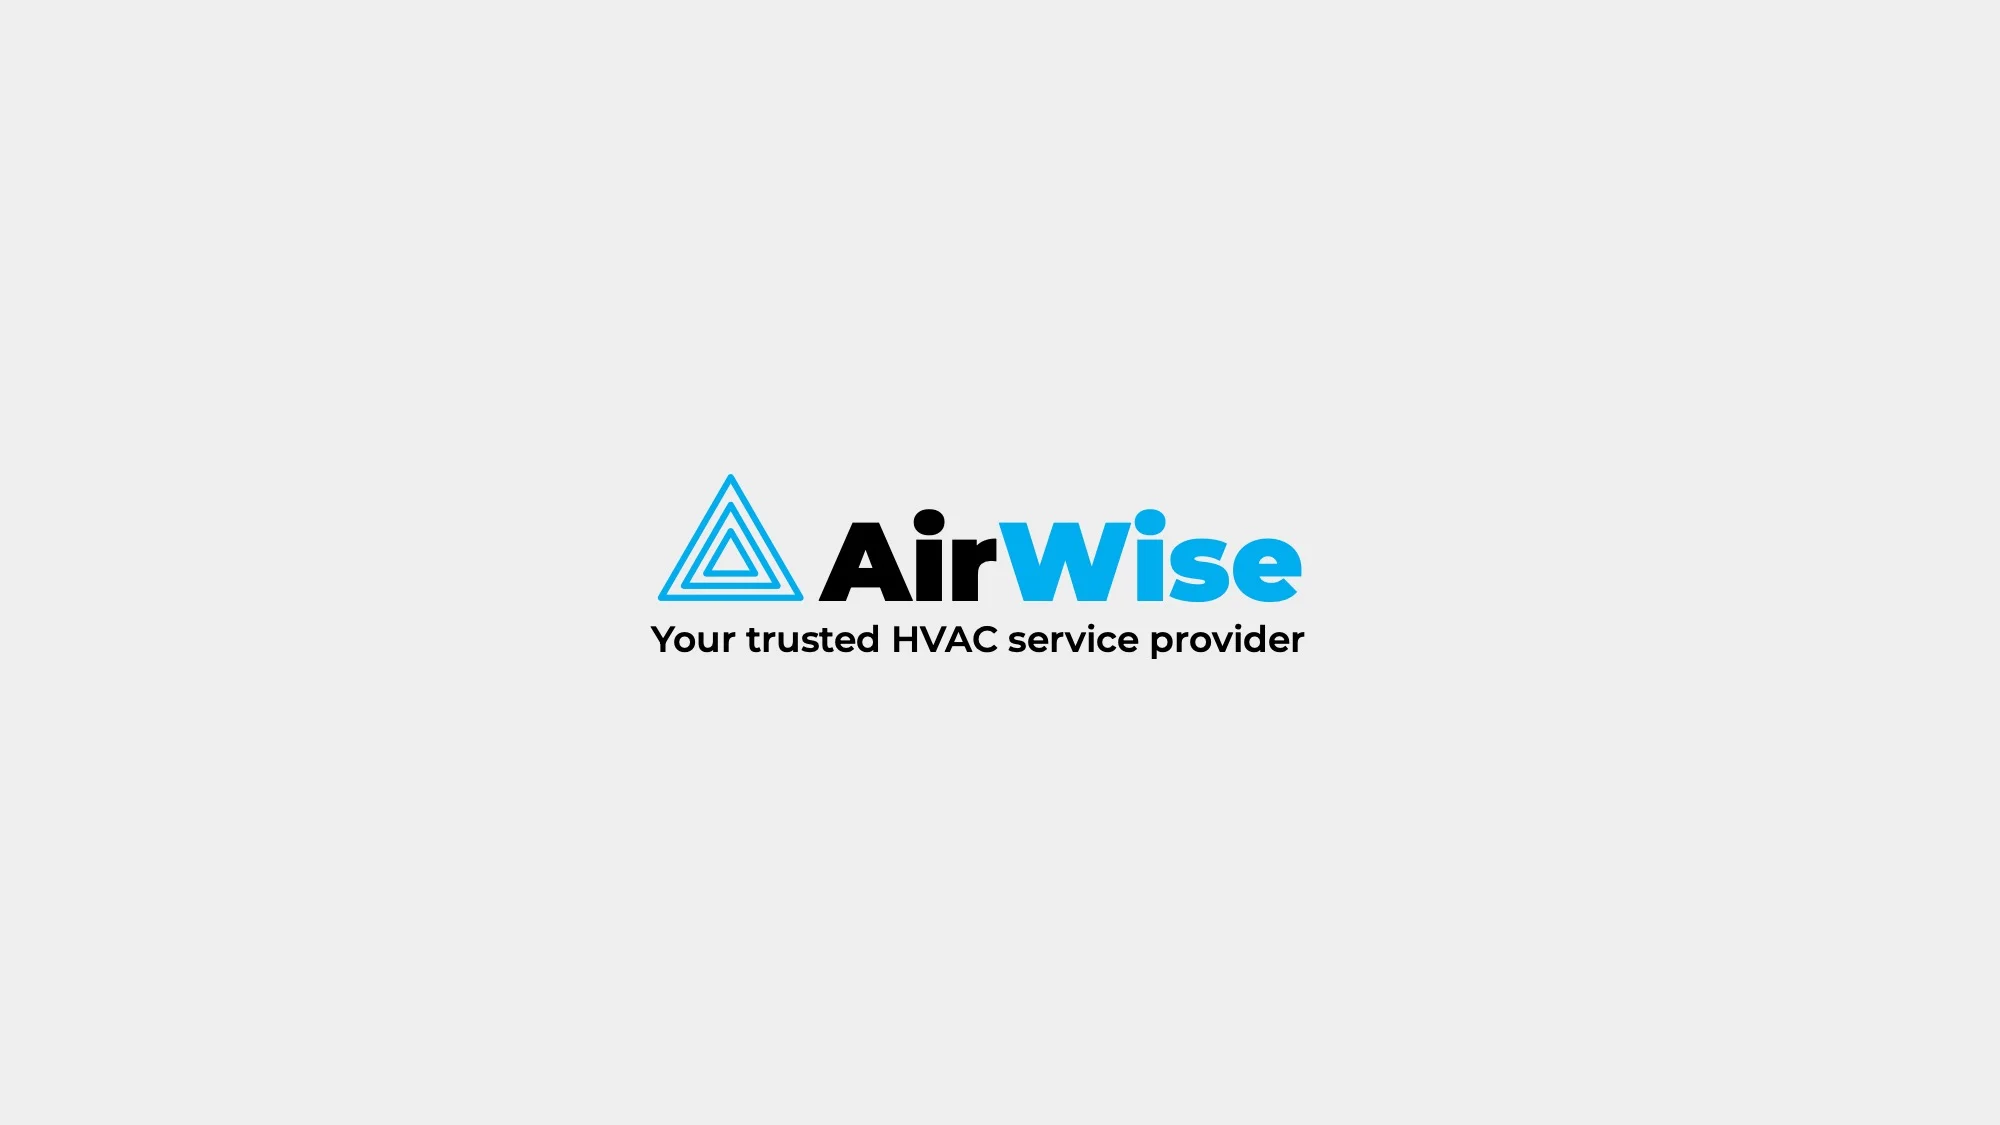 AirWise-HVAC-Business-Pitch-Slide-1